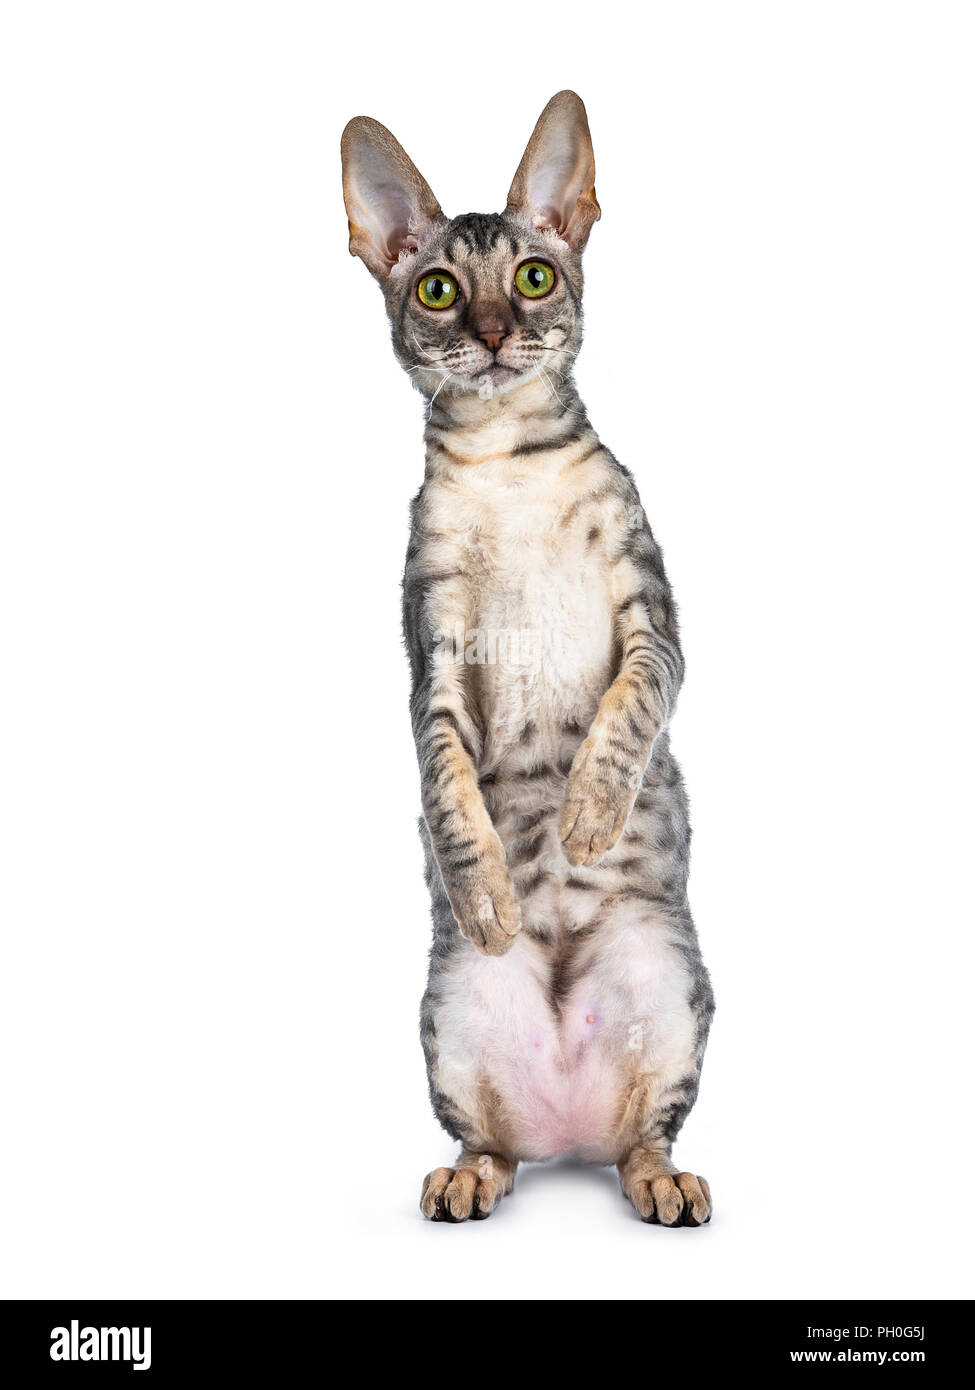 Blue tortie tabby Cornish Rex kitten standing on hind paws like meerkat, looking at camera isolated on white background Stock Photo